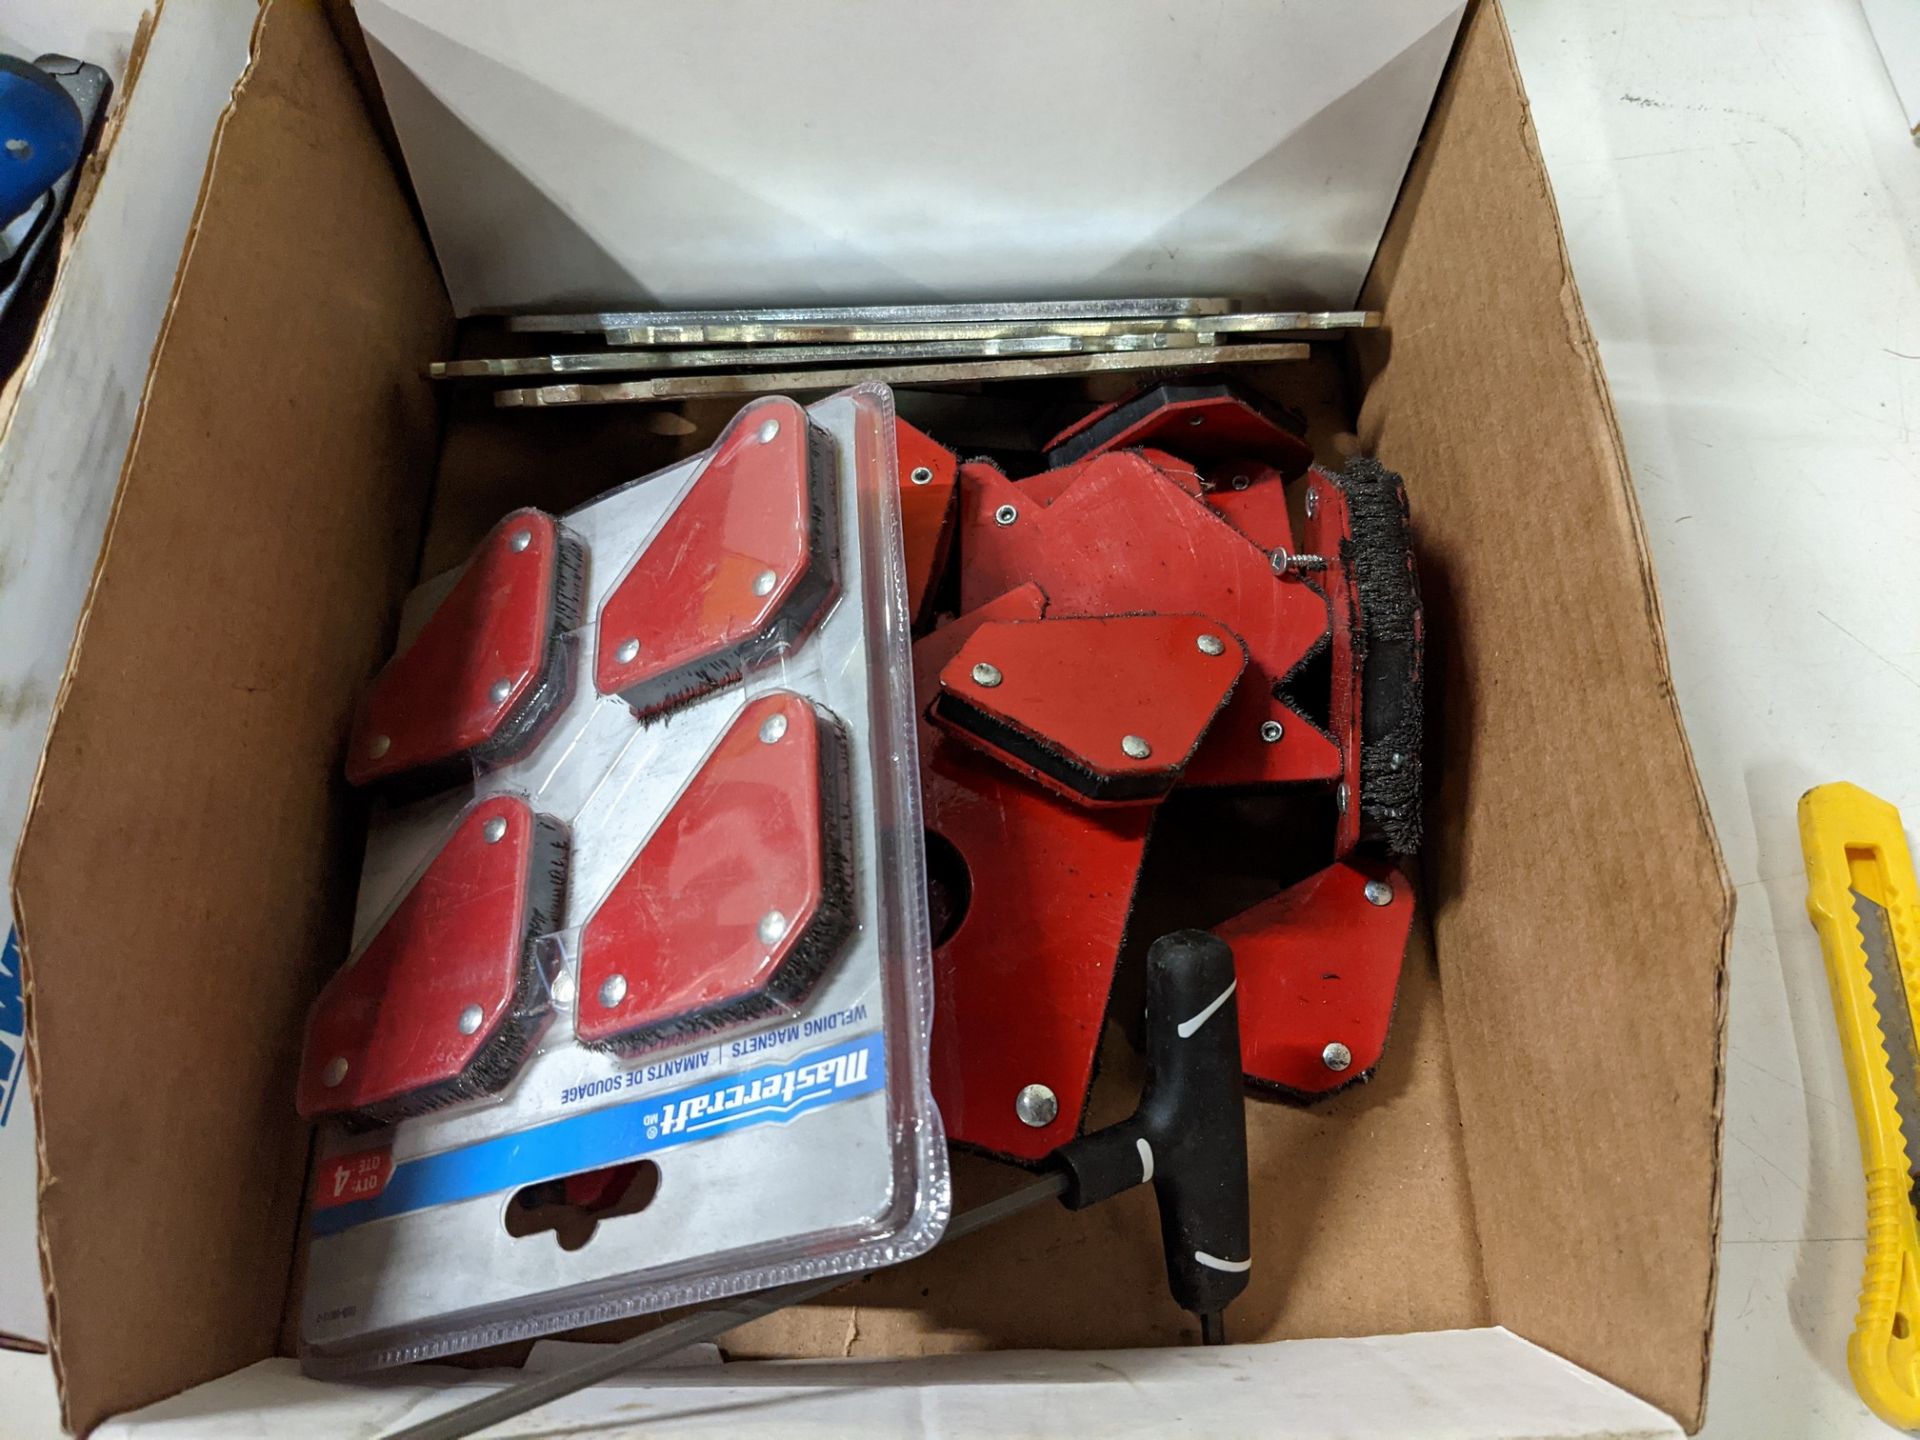 LOT PIPE WRENCHES, MAGNETS, WIRE CUTTERS, PLIERS, EC. (4 BOXES) - Image 2 of 5